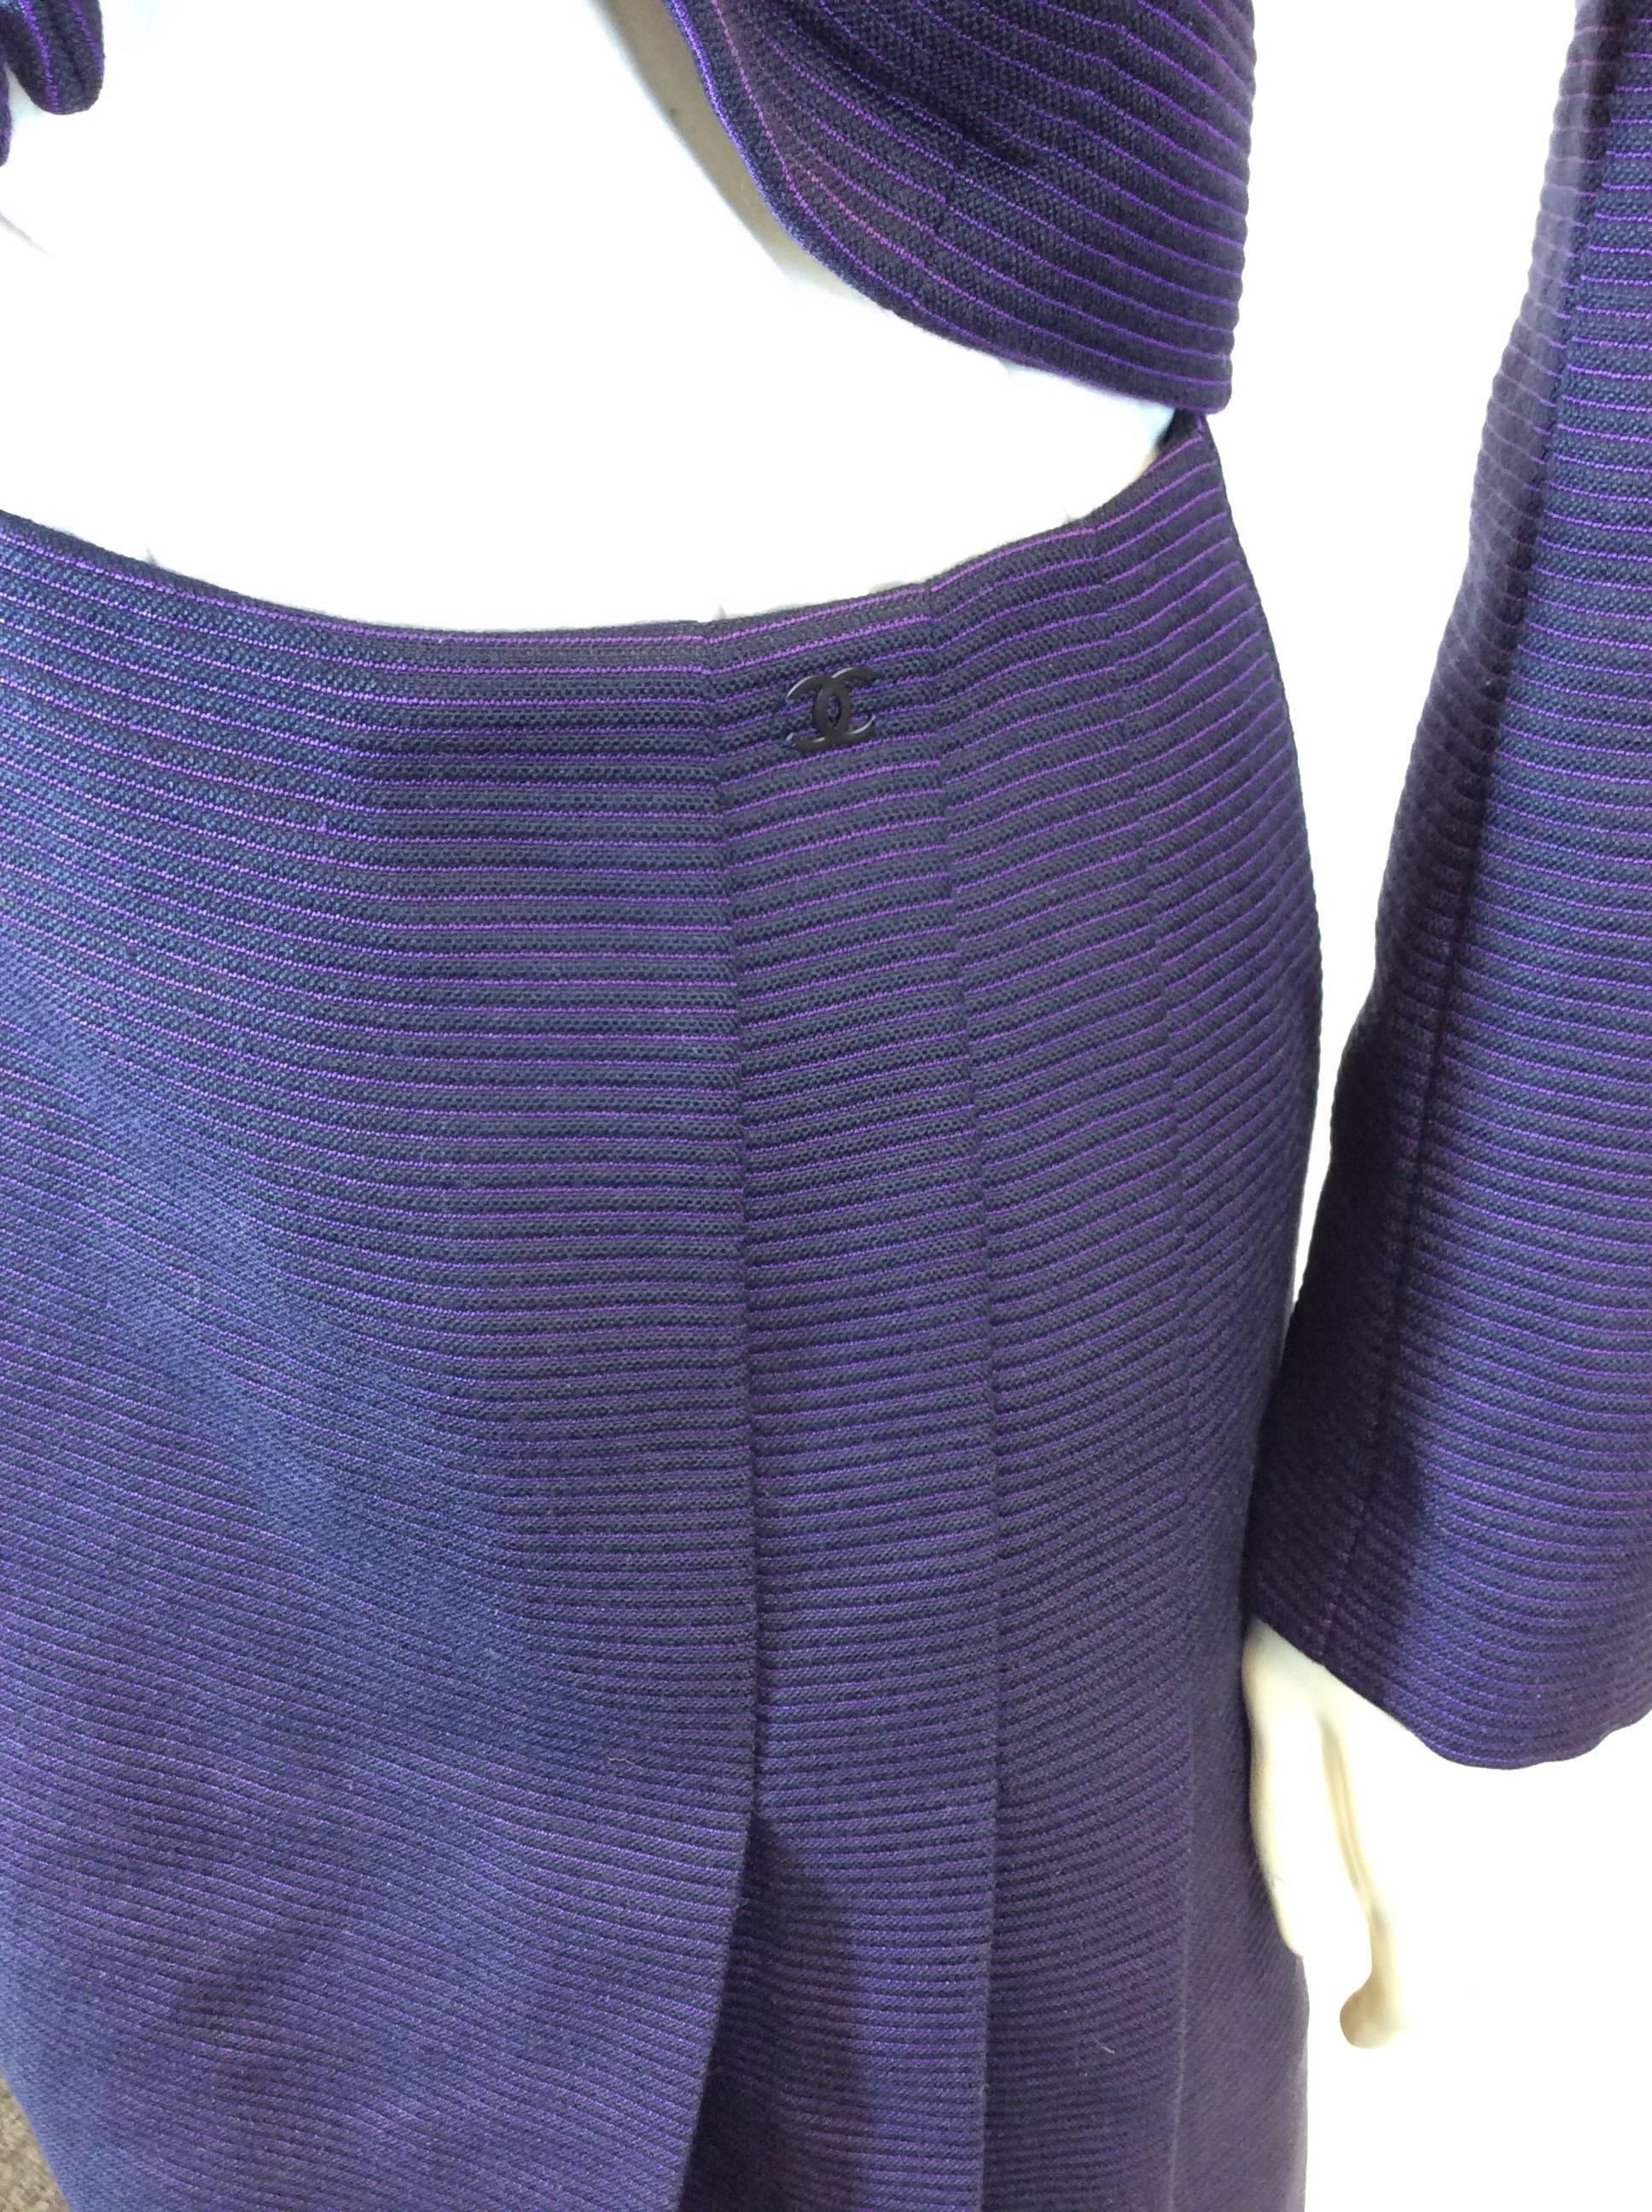 HOLIDAY FLASH SALE! 50% Off! Chanel Two Piece Purple Skirt Suit Set 4